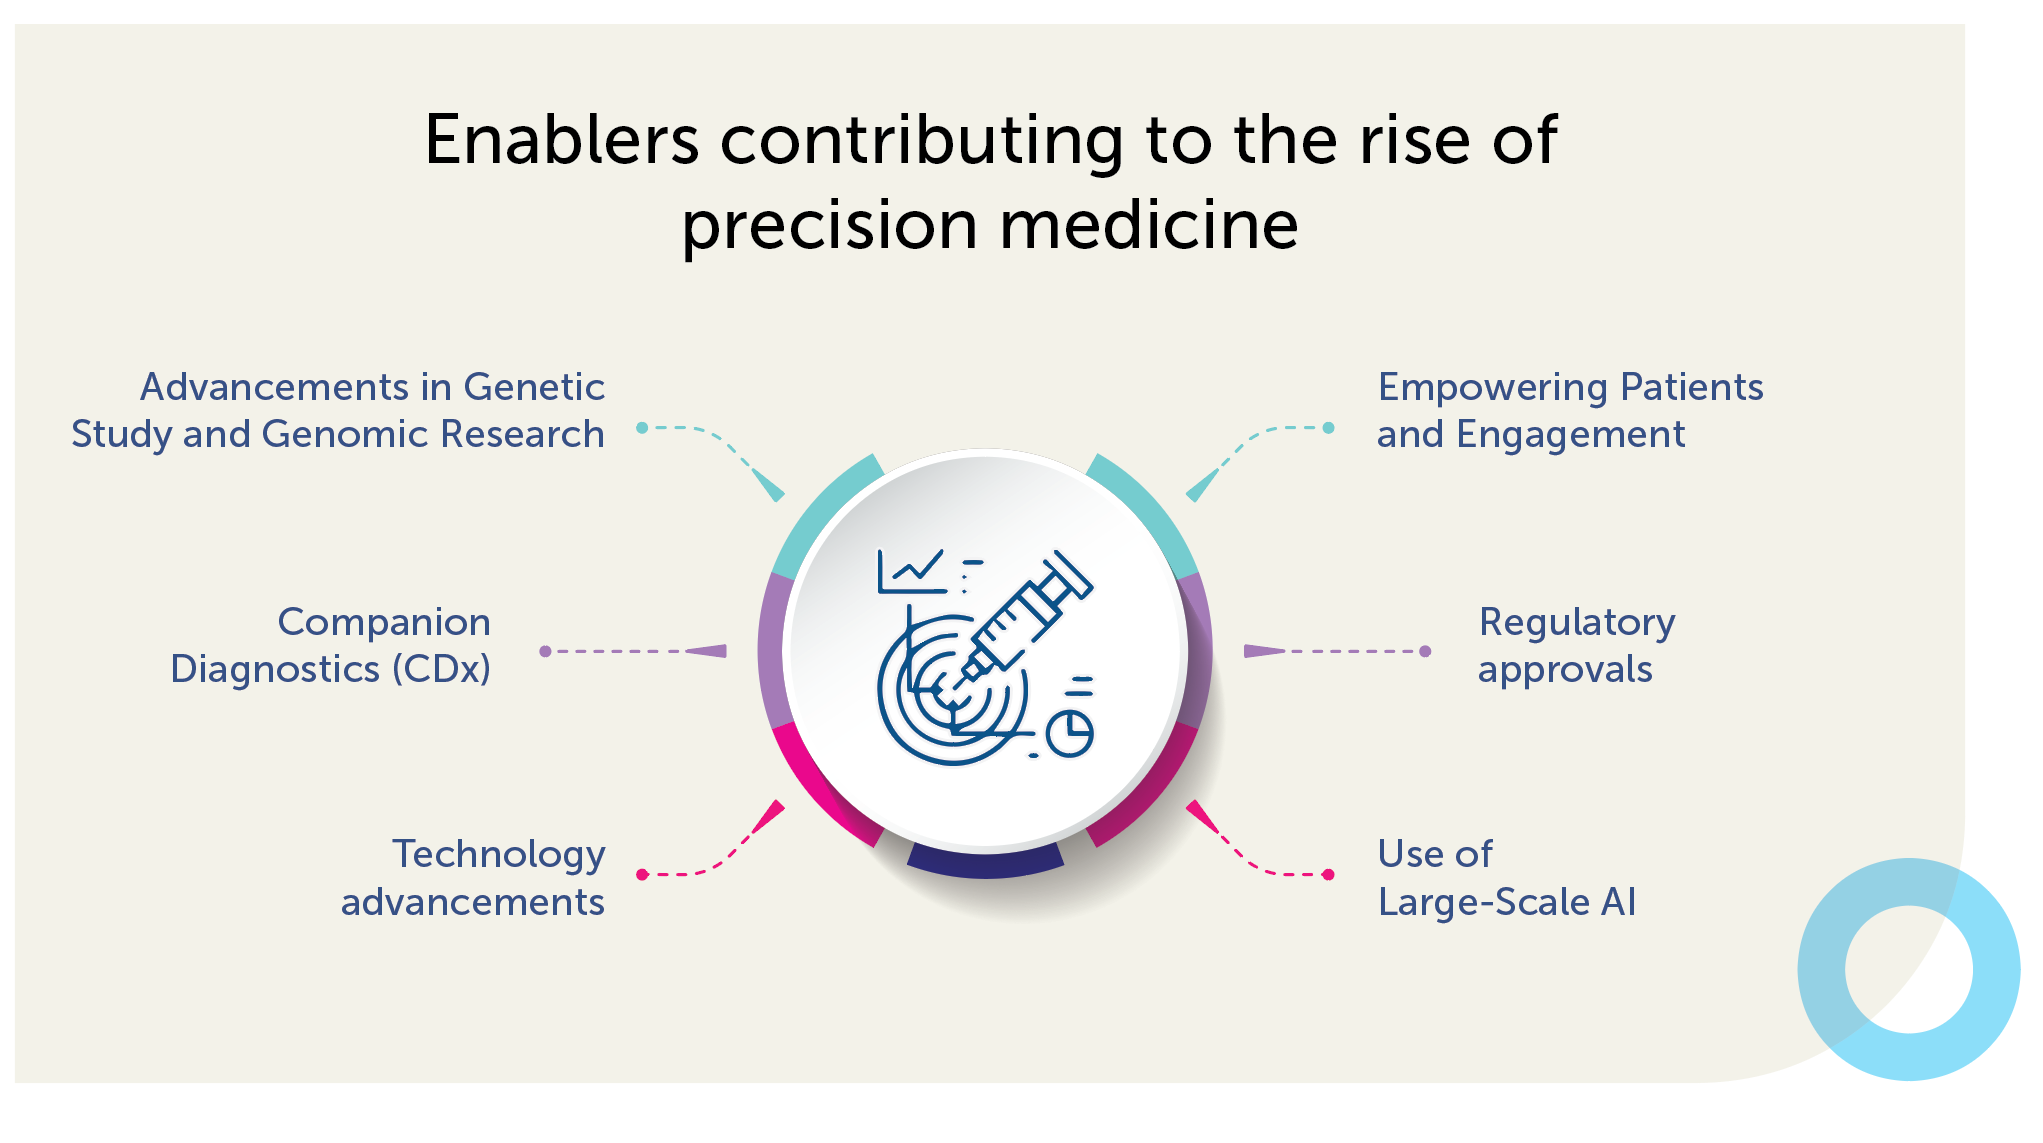 Enablers contributing to the rise of AI in precision medicine